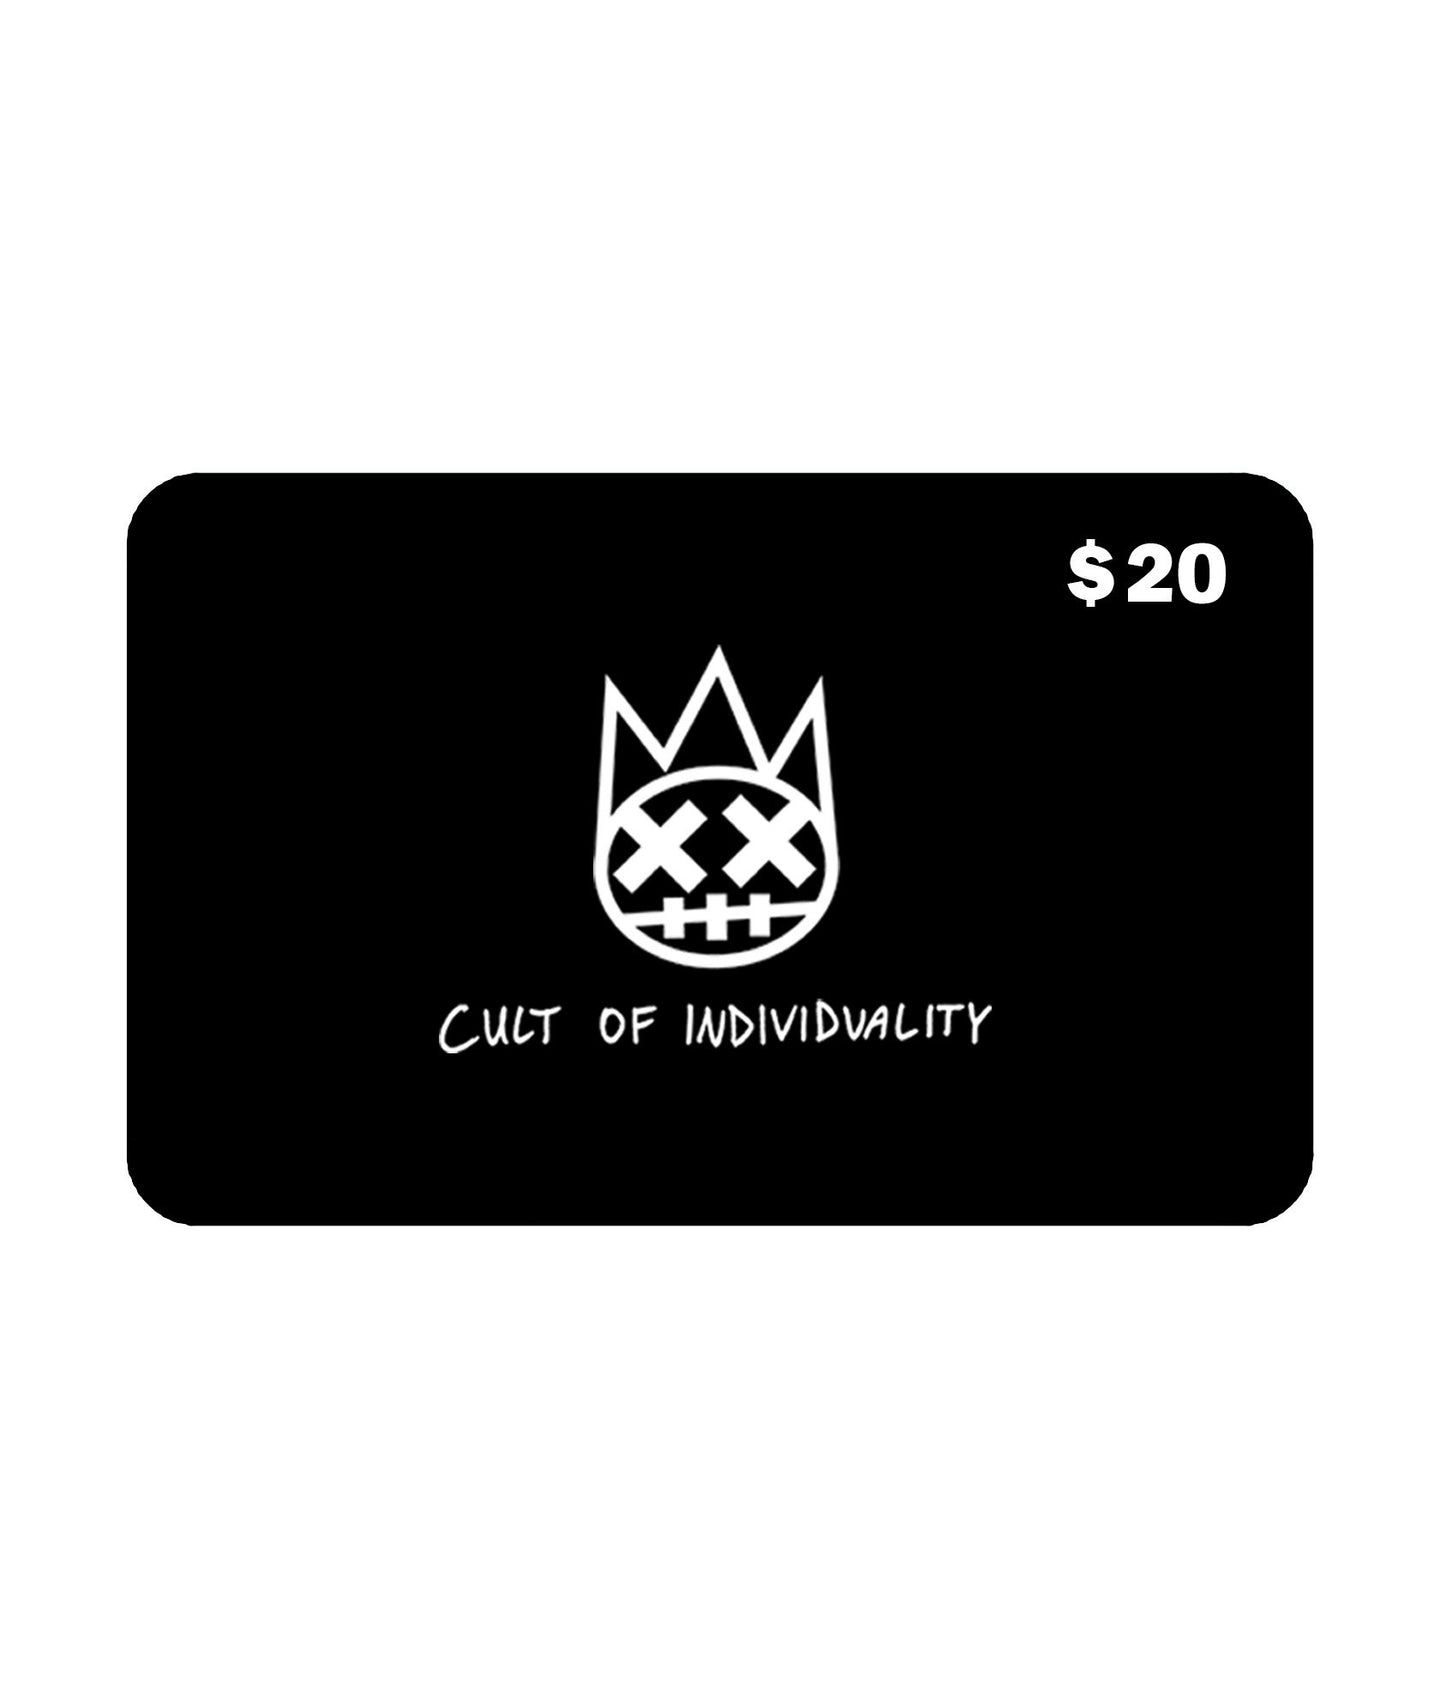 Cult of Individuality$20 CULT Gift Card